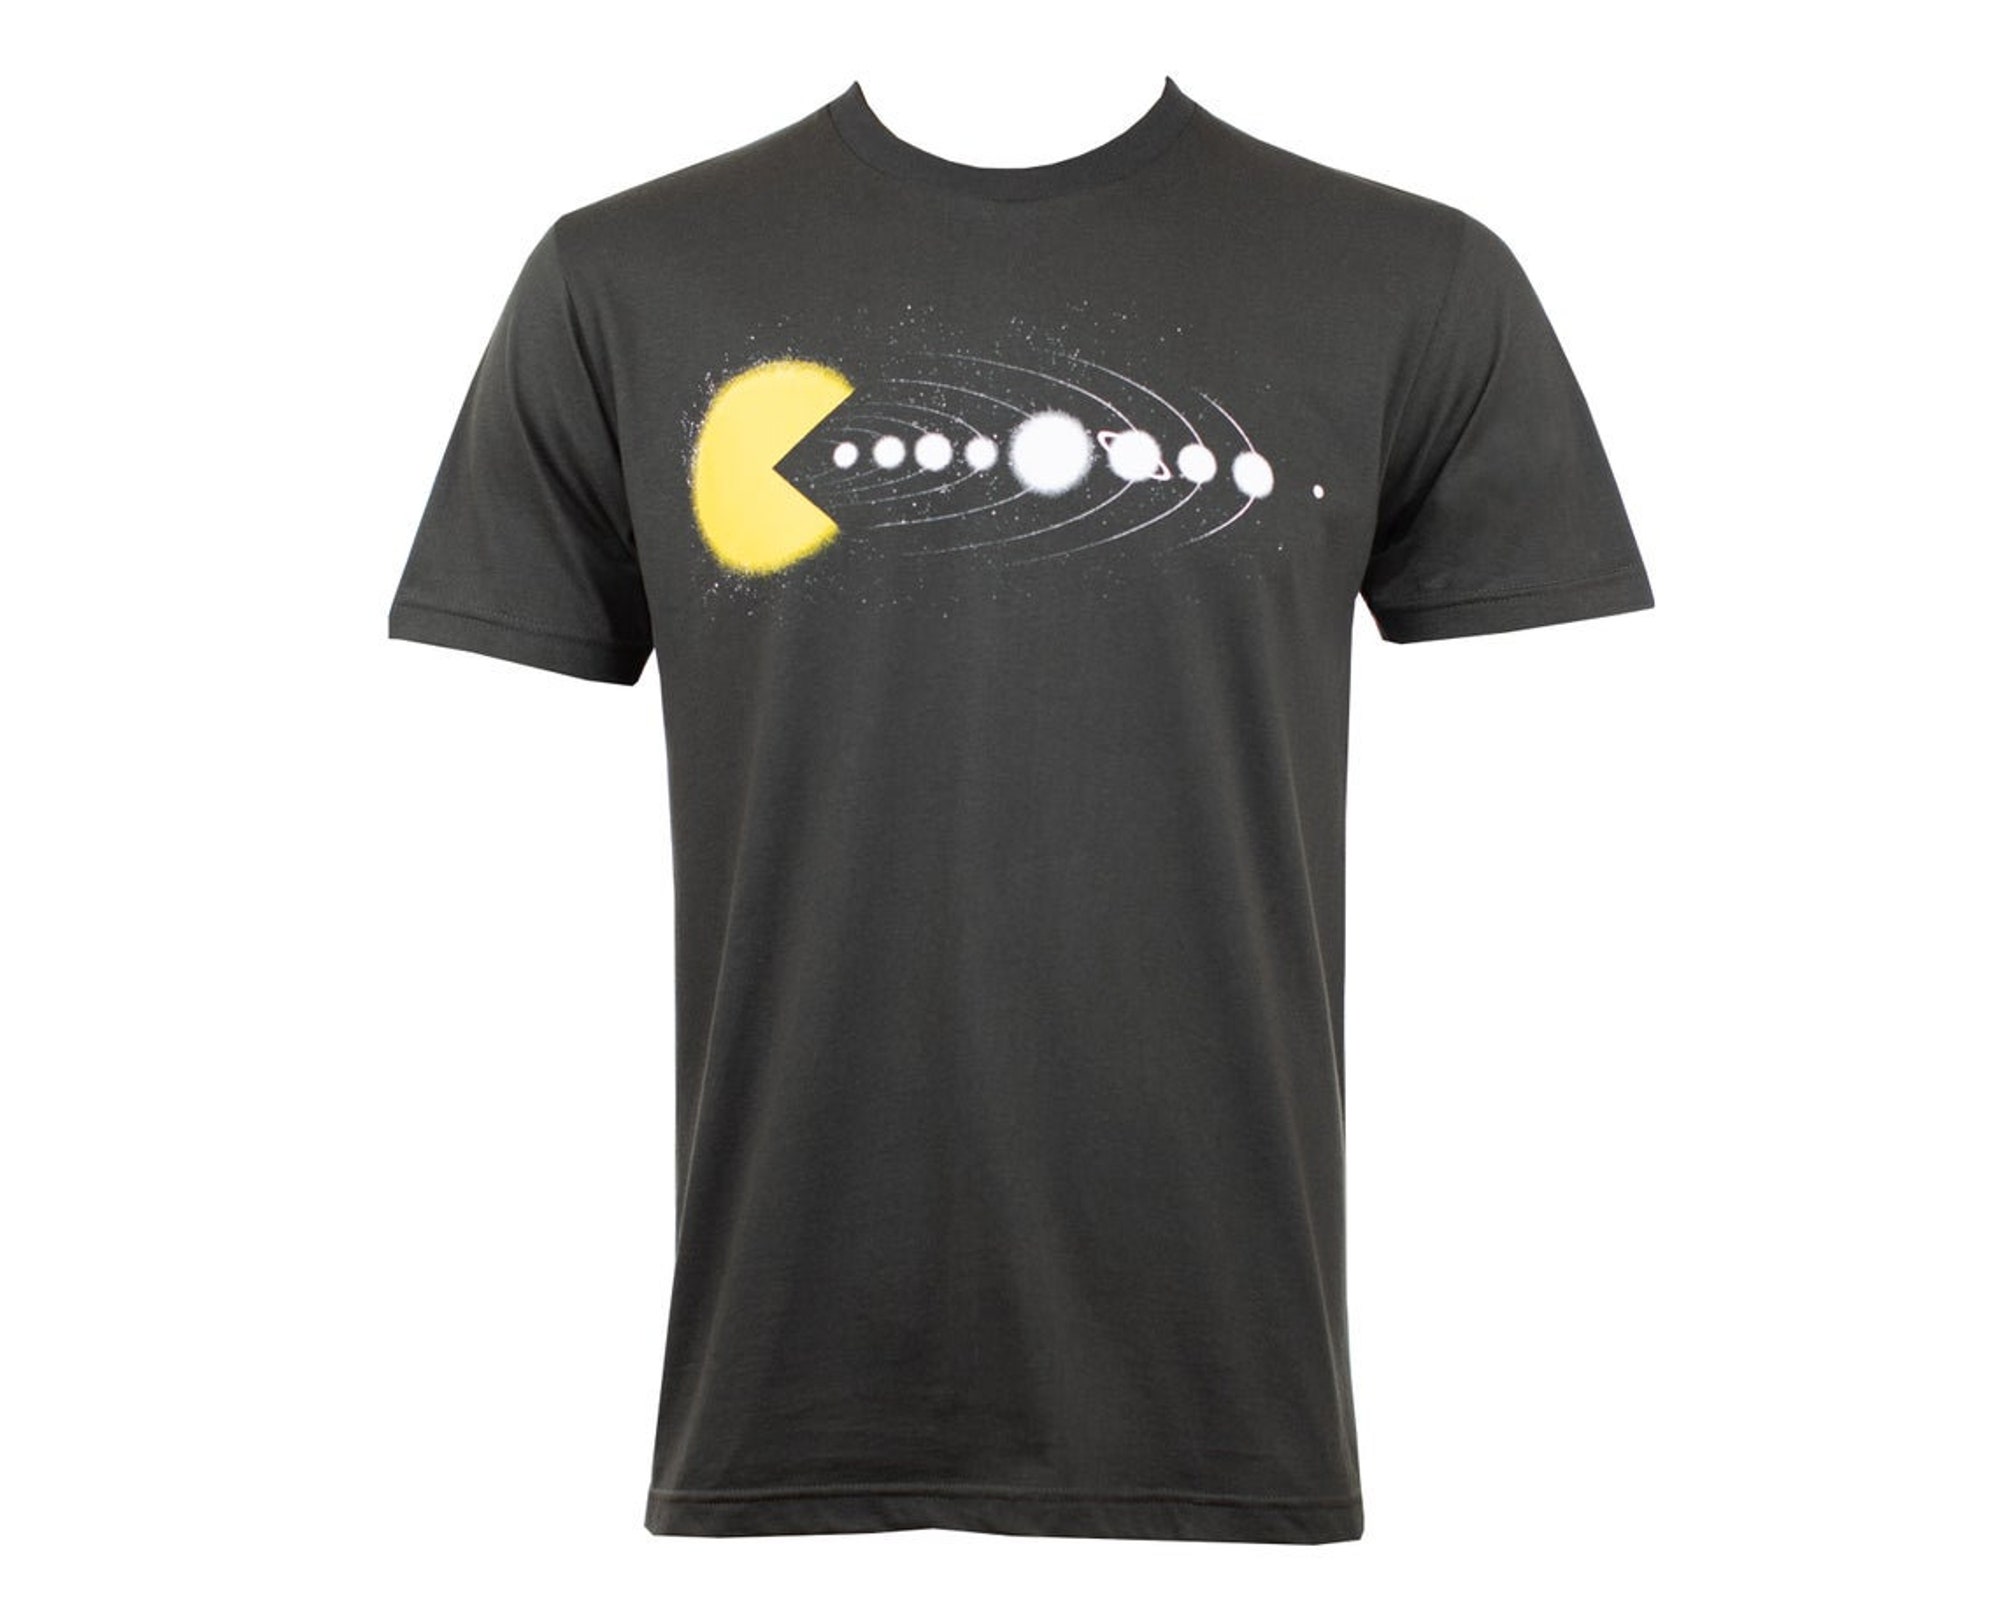 Discover Maglietta T-Shirt Pacman Uomo Donna Bambini Gaming Hippie Psytrance Graphic